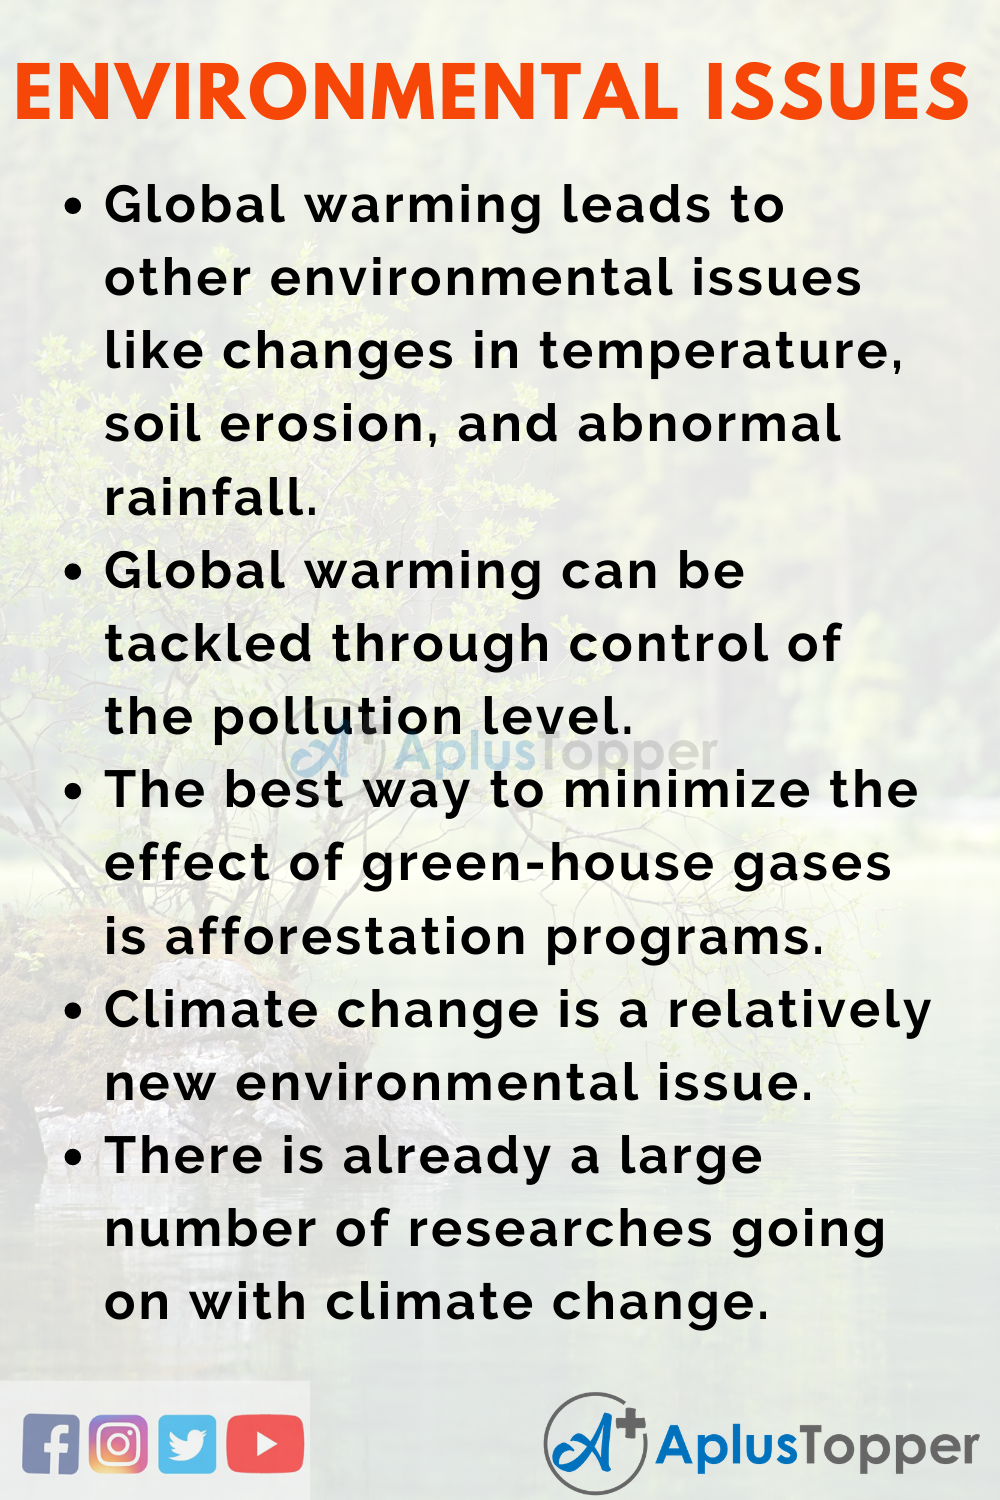 what are the conclusion of environmental issues